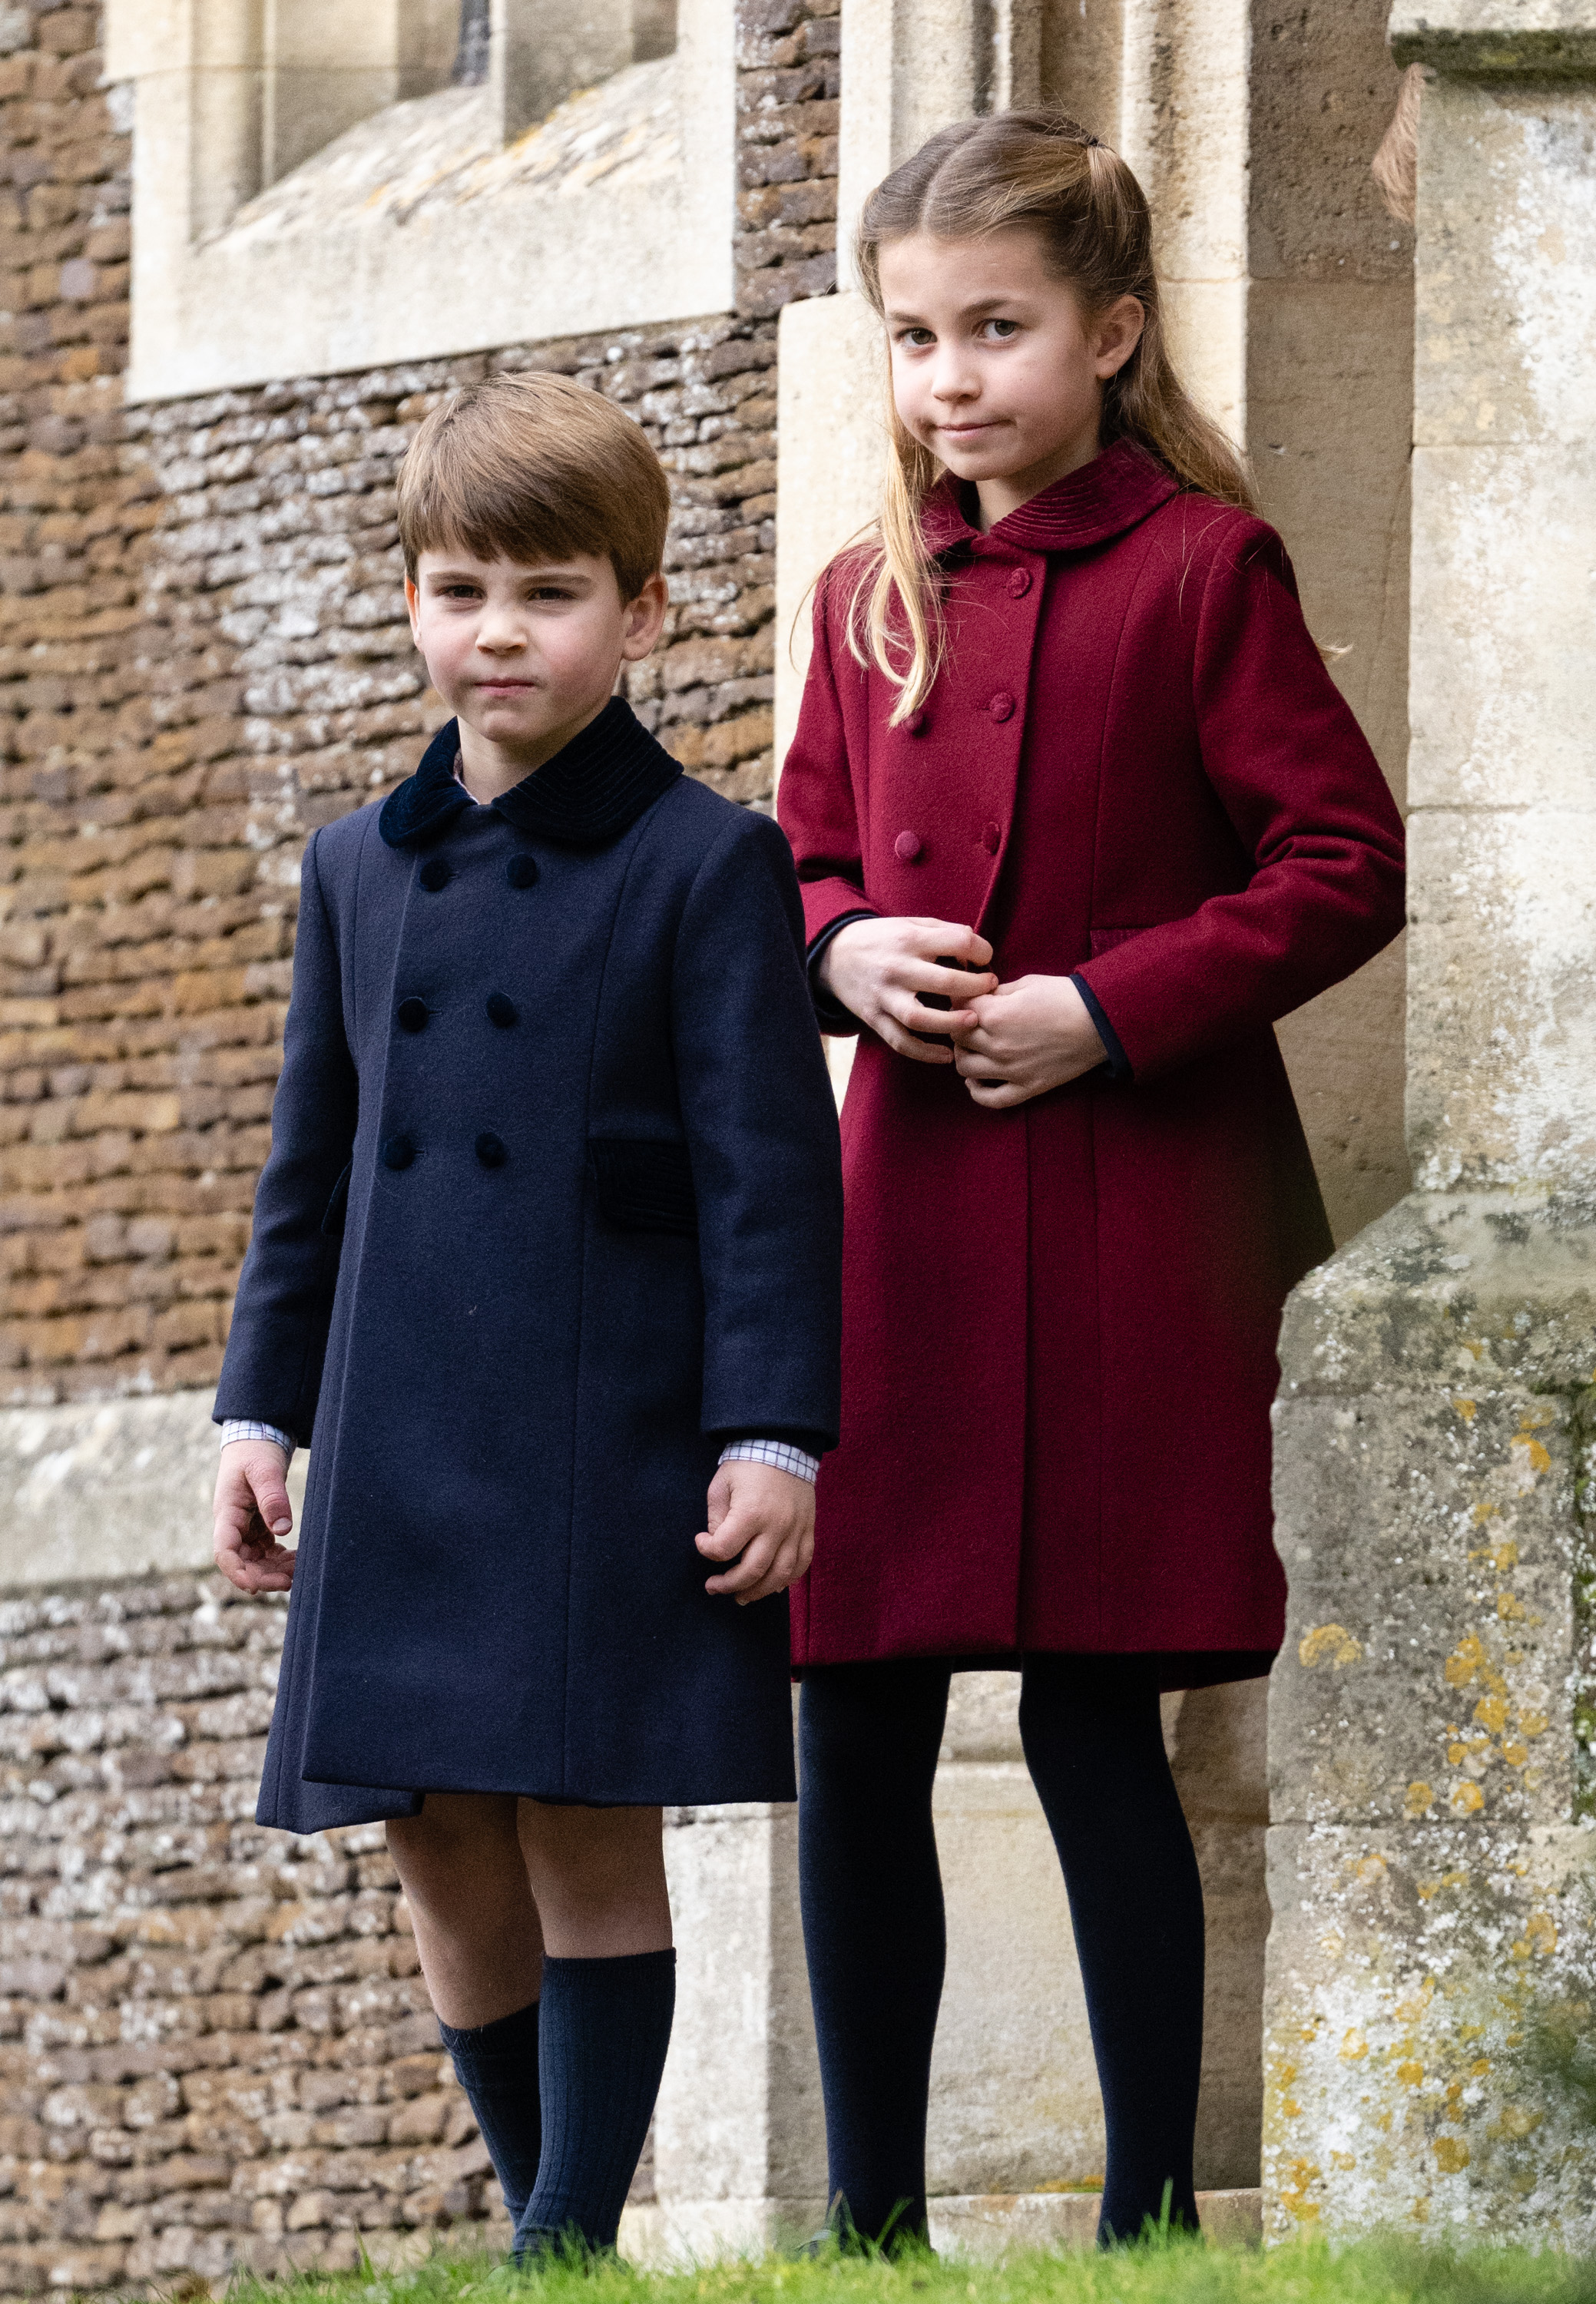 <p>Prince Louis kept close to his big sis, Princess Charlotte, following the Christmas services at St. Mary Magdalene Church at King Charles III's Sandringham estate in Norfolk, England, on Dec. 25, 2022.</p><p>MORE: <a href="https://www.wonderwall.com/celebrity/royals/best-photos-from-queen-elizabeth-ii-funeral-king-charles-princes-william-prince-harry-george-charlotte-kate-meghan652347.gallery">See the best photos from Queen Elizabeth II's state funeral</a></p>